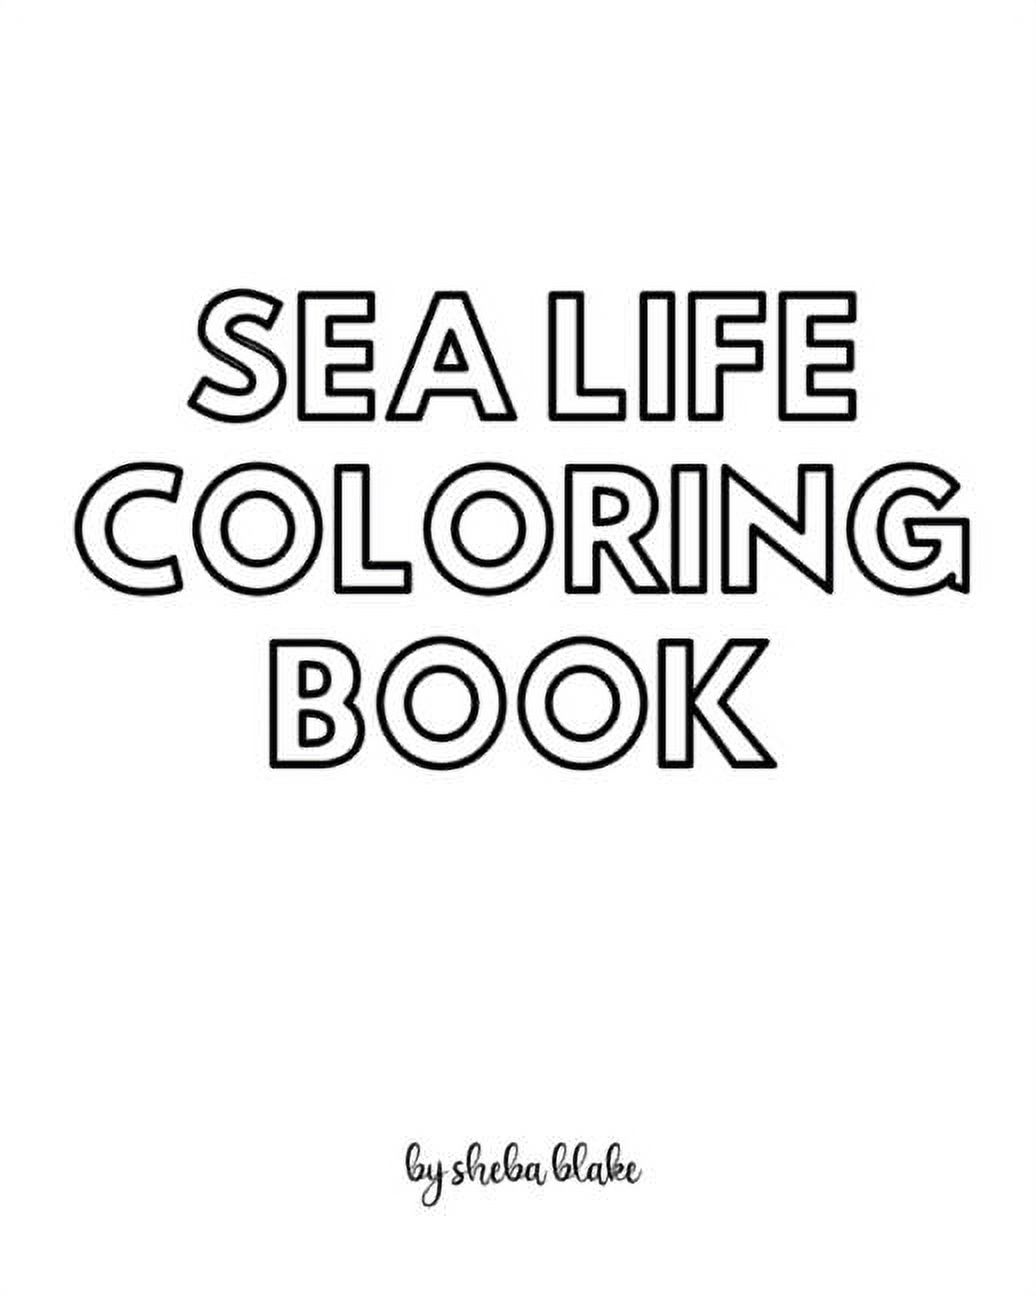 Sea Life Coloring Book for Teens and Young Adults - Create Your Own Doodle Cover (8x10 Softcover Personalized Coloring Book / Activity Book) [Book]